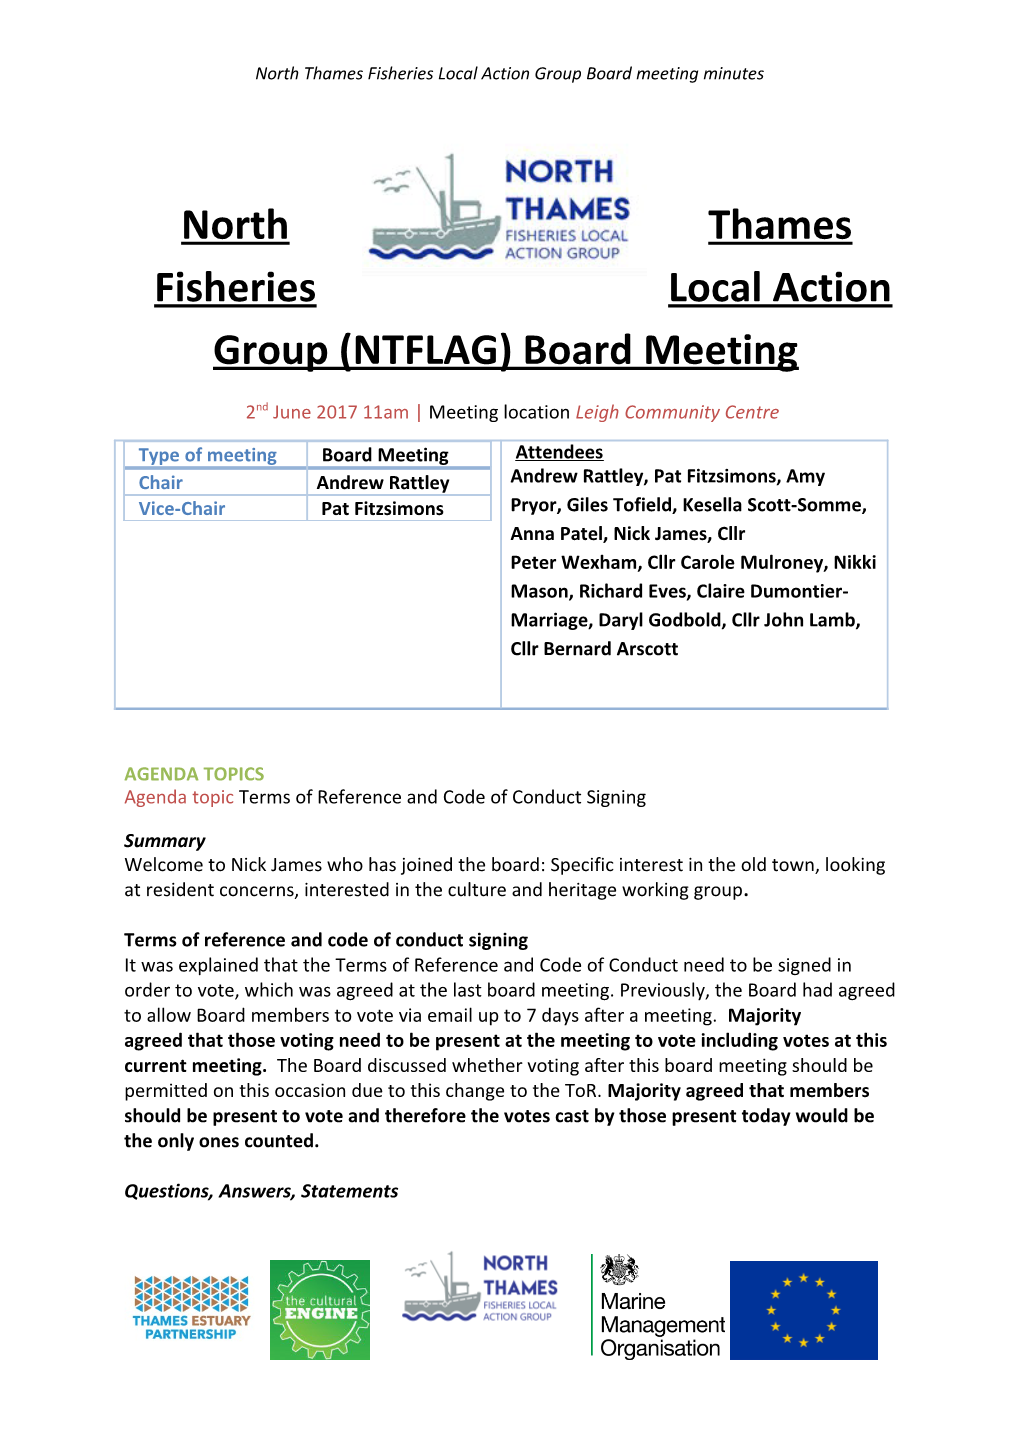 North Thames Fisheries Local Action Group (NTFLAG) Board Meeting